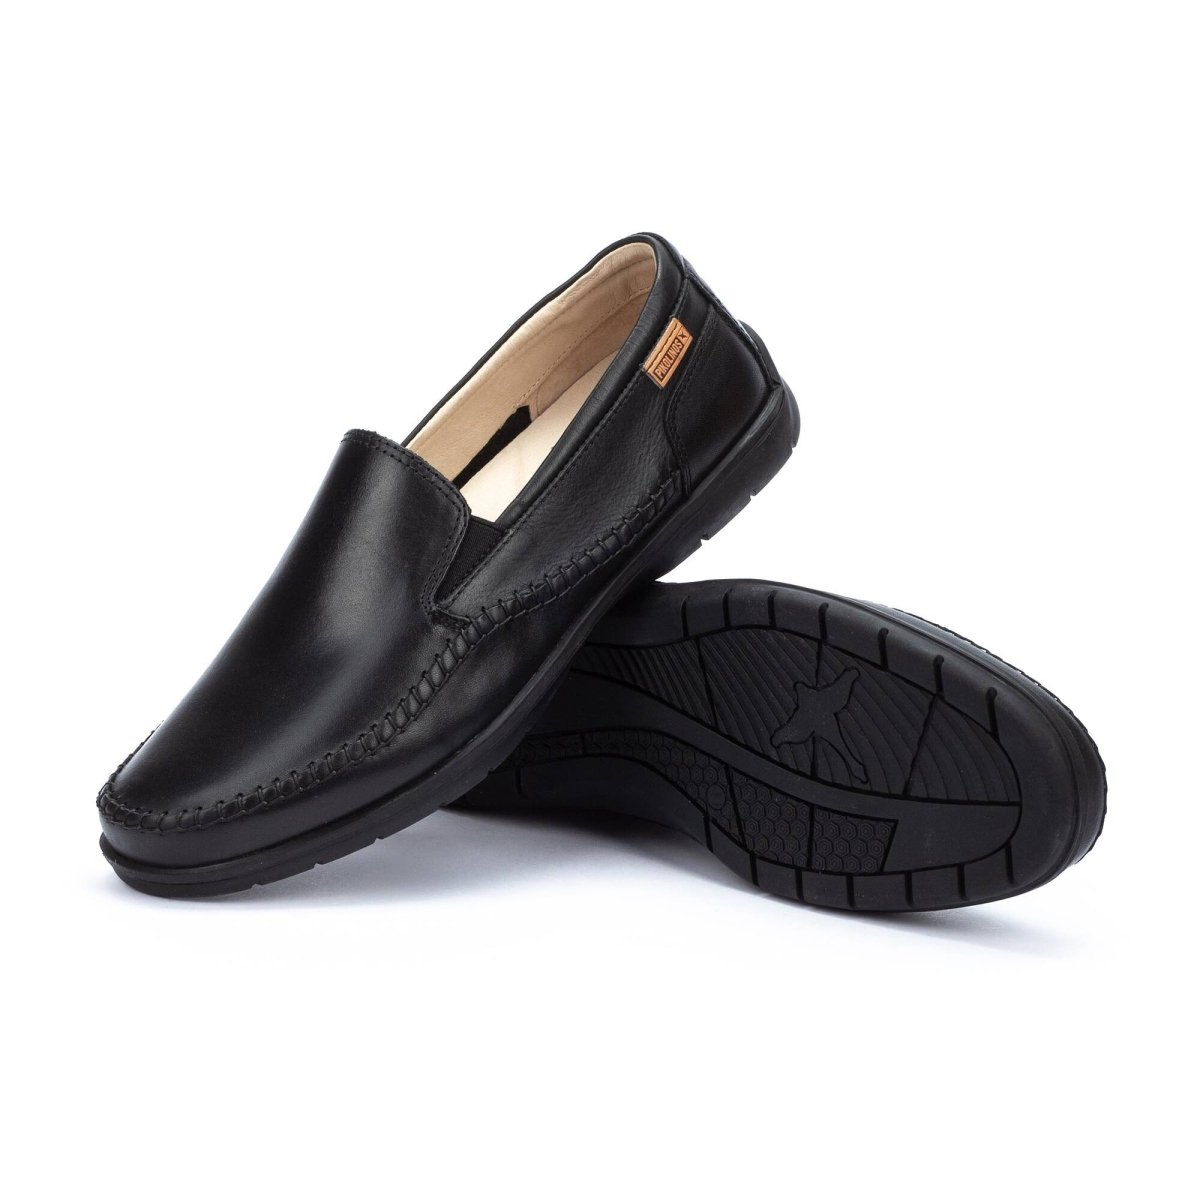 PIKOLINOS MARBELLA M9A-3111 MEN'S LOAFERS SLIP-ON SHOES IN BLACK - TLW Shoes